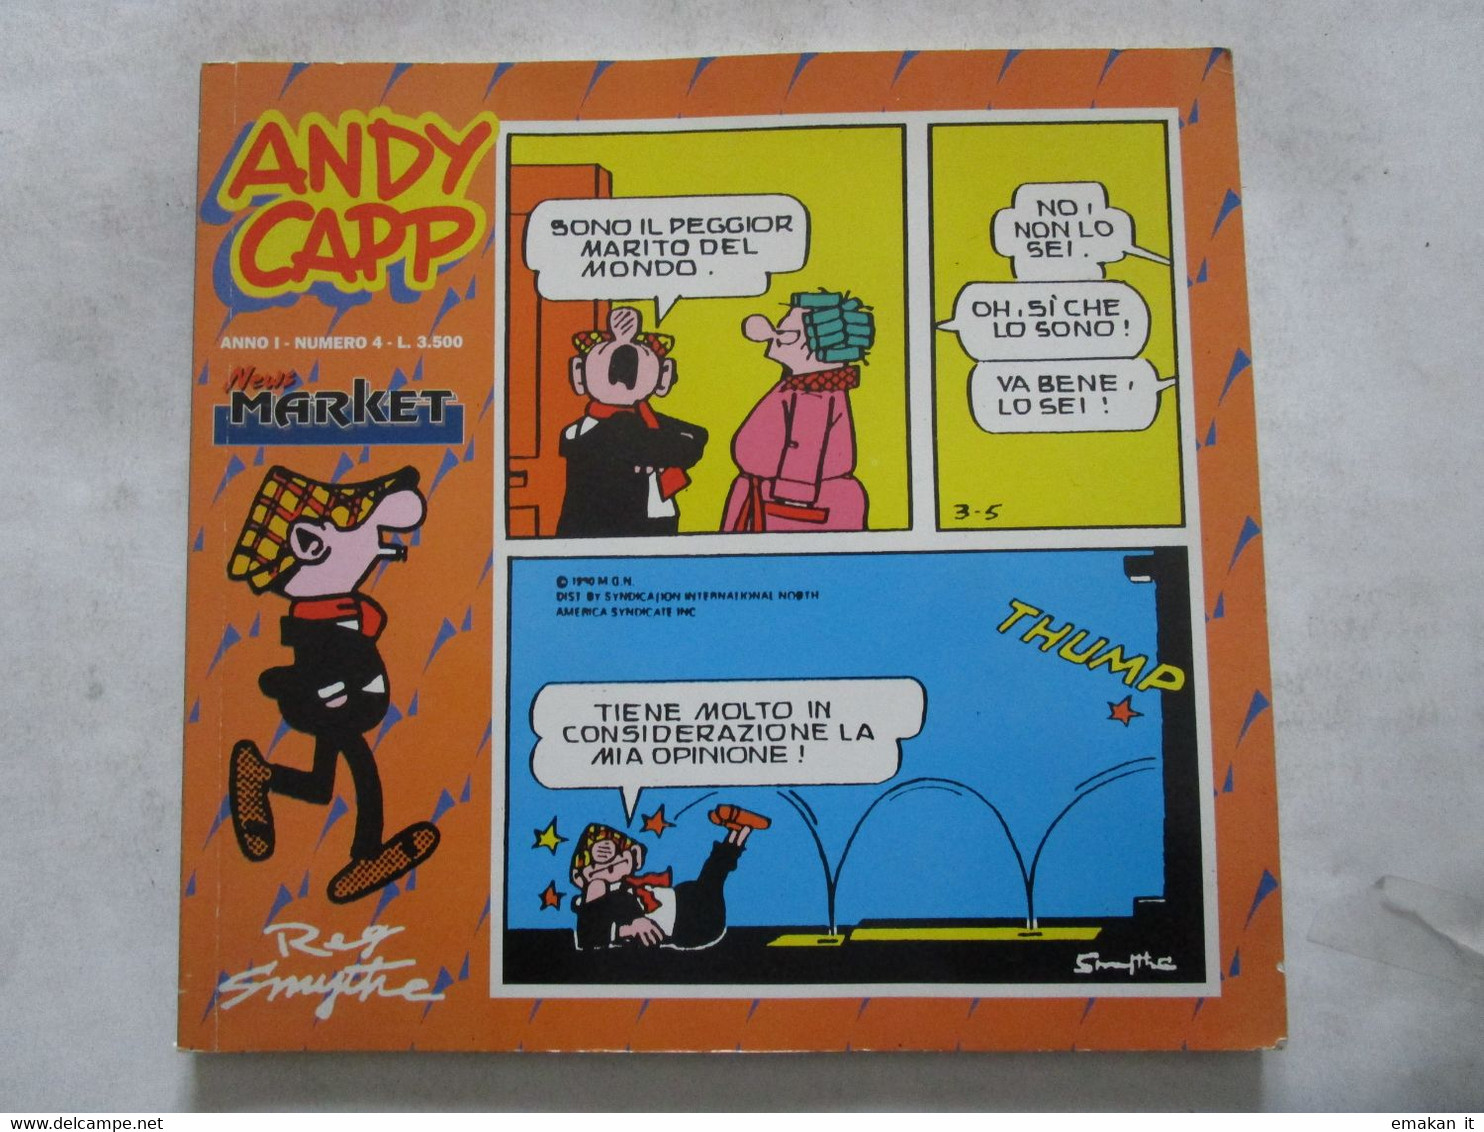 # ANDY CAPP NEW MARKET N 4 / 1993 - First Editions